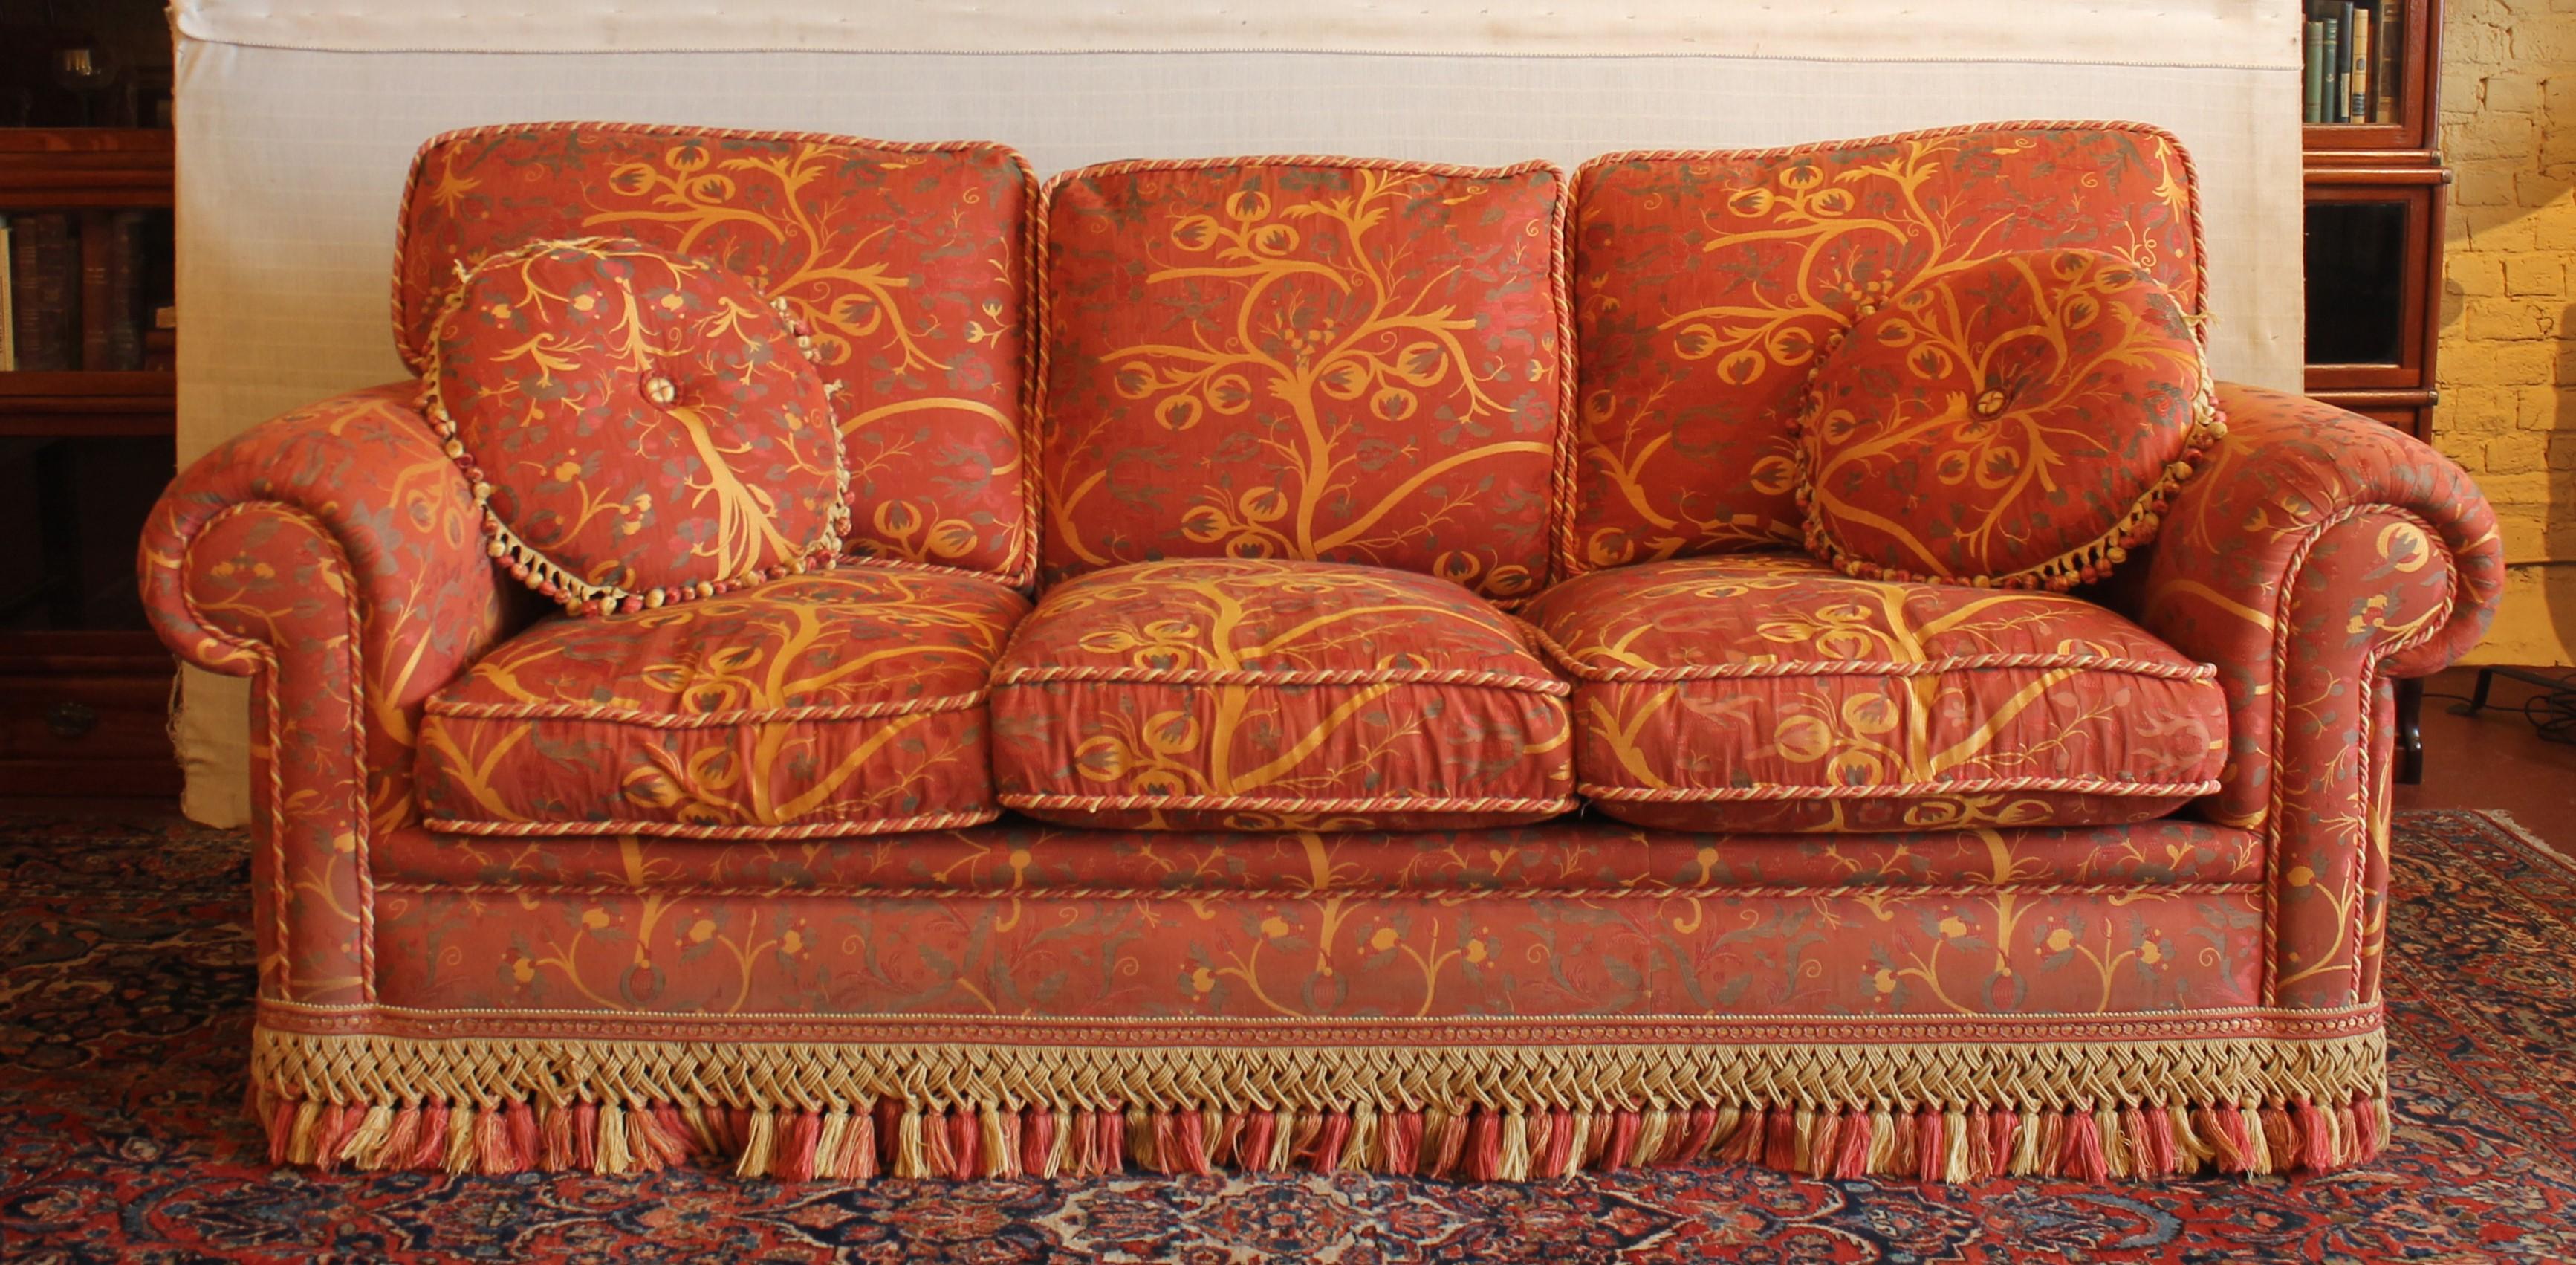 Pairs Of Sofas With Floral Decor In Good Condition In Brussels, Brussels